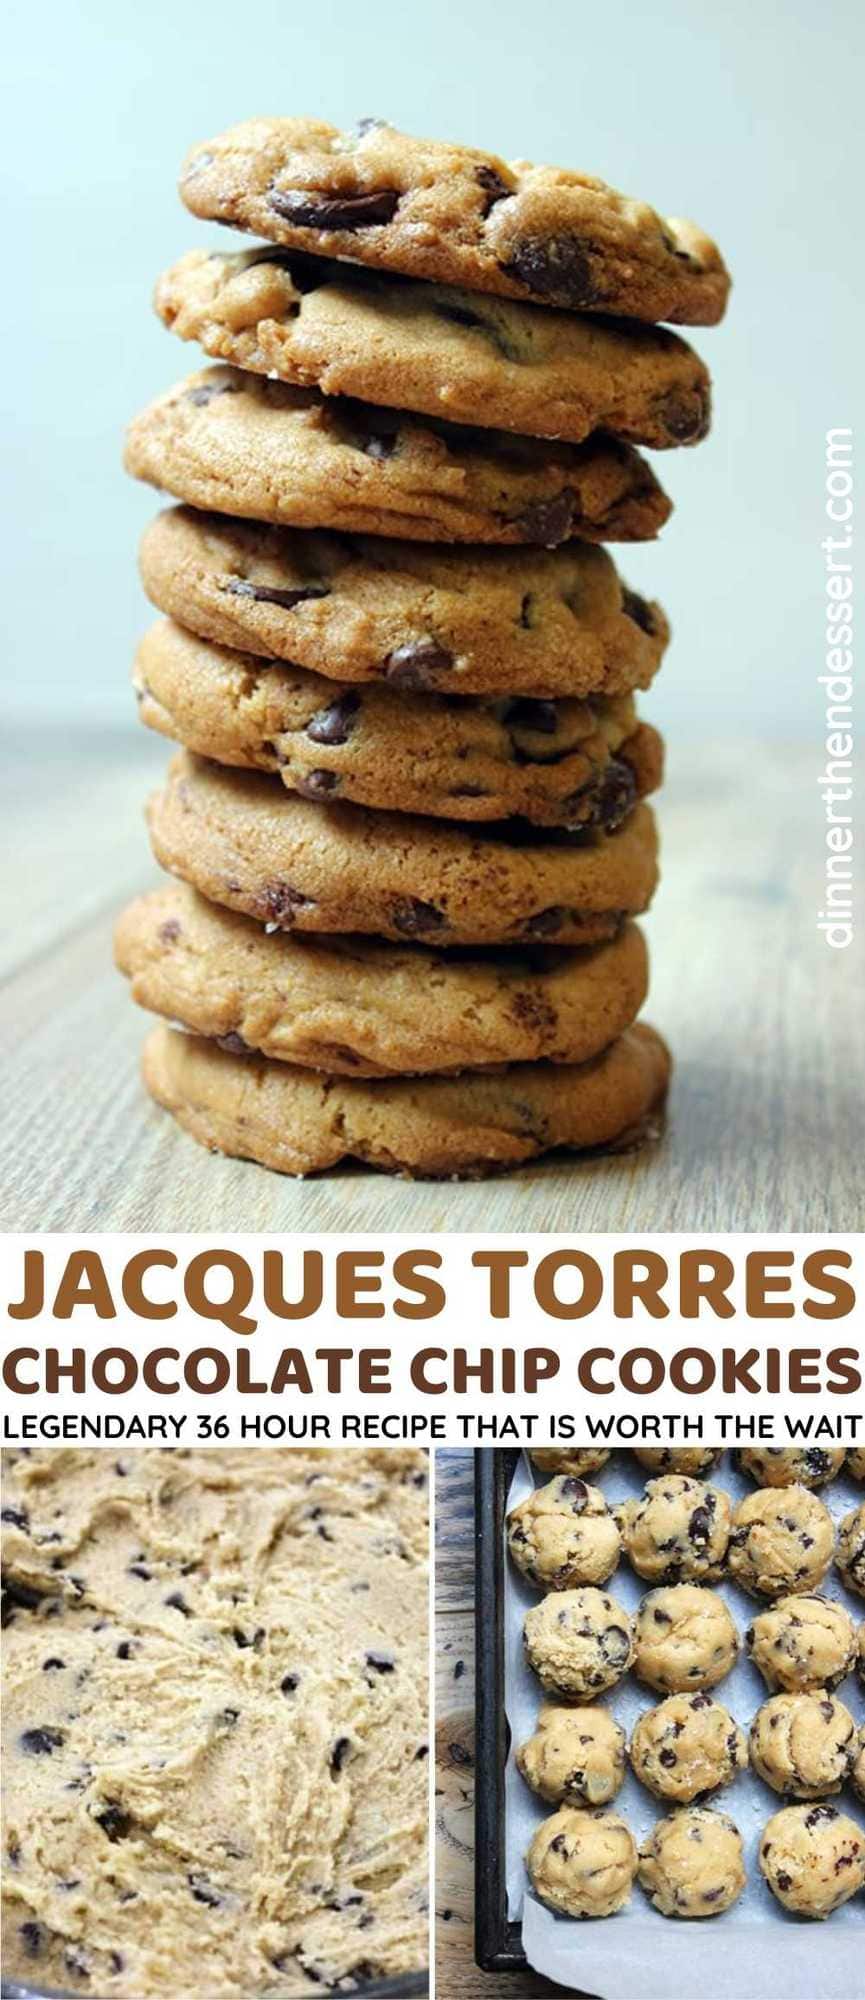 Jacques Torres Chocolate Chip Cookies Collage